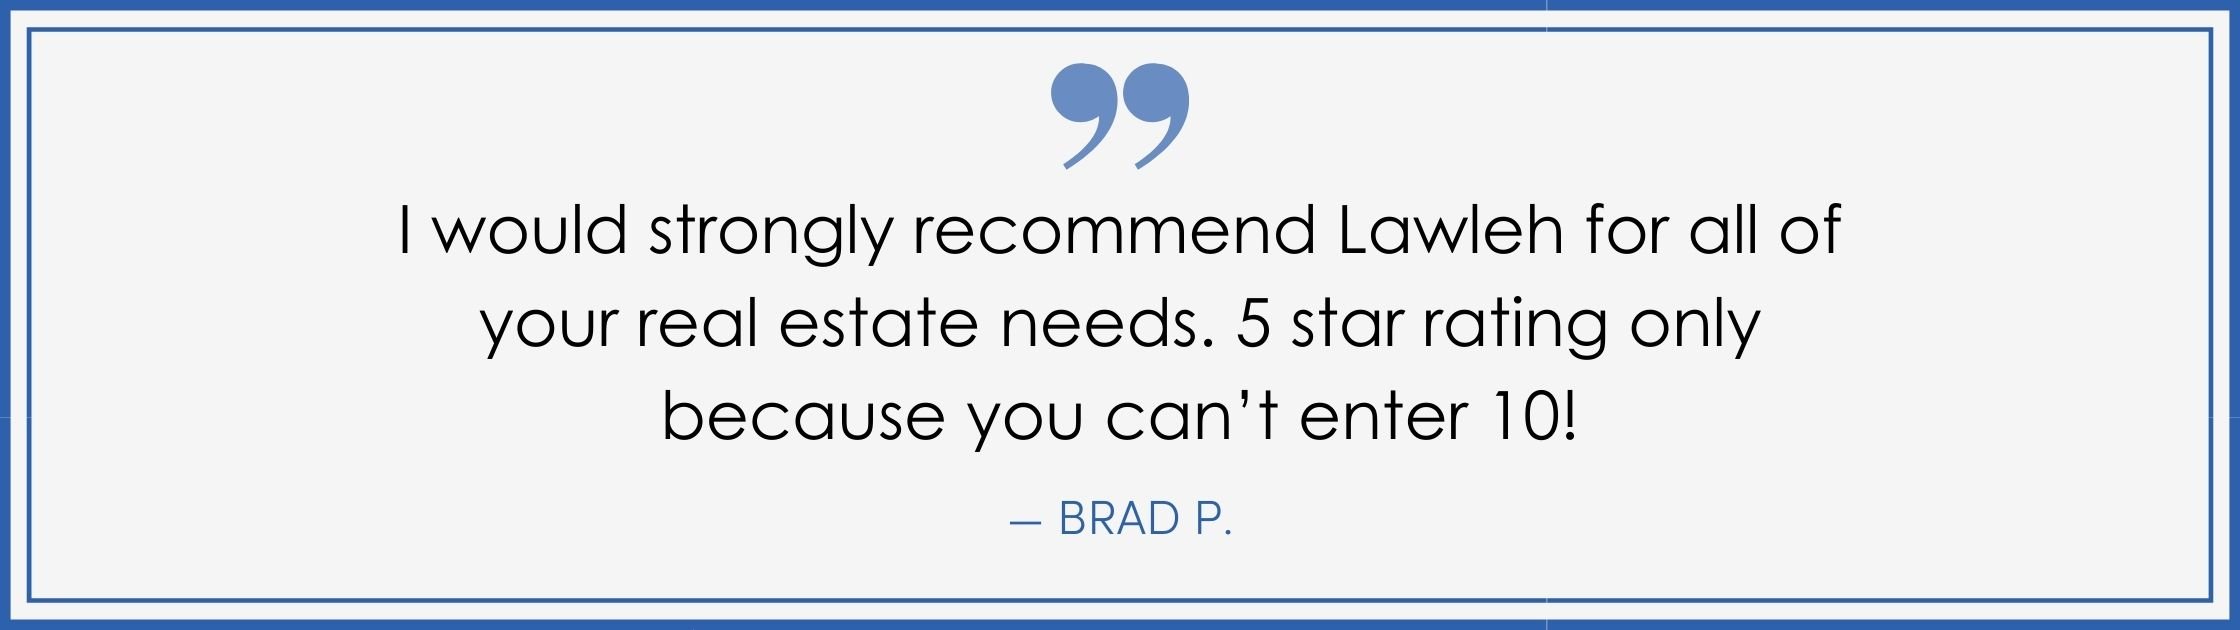 “I would strongly recommend Lawleh for all your real estate needs. 5 stars rating only because you can’t enter 10!” –Brad P. (Copy) (Copy)